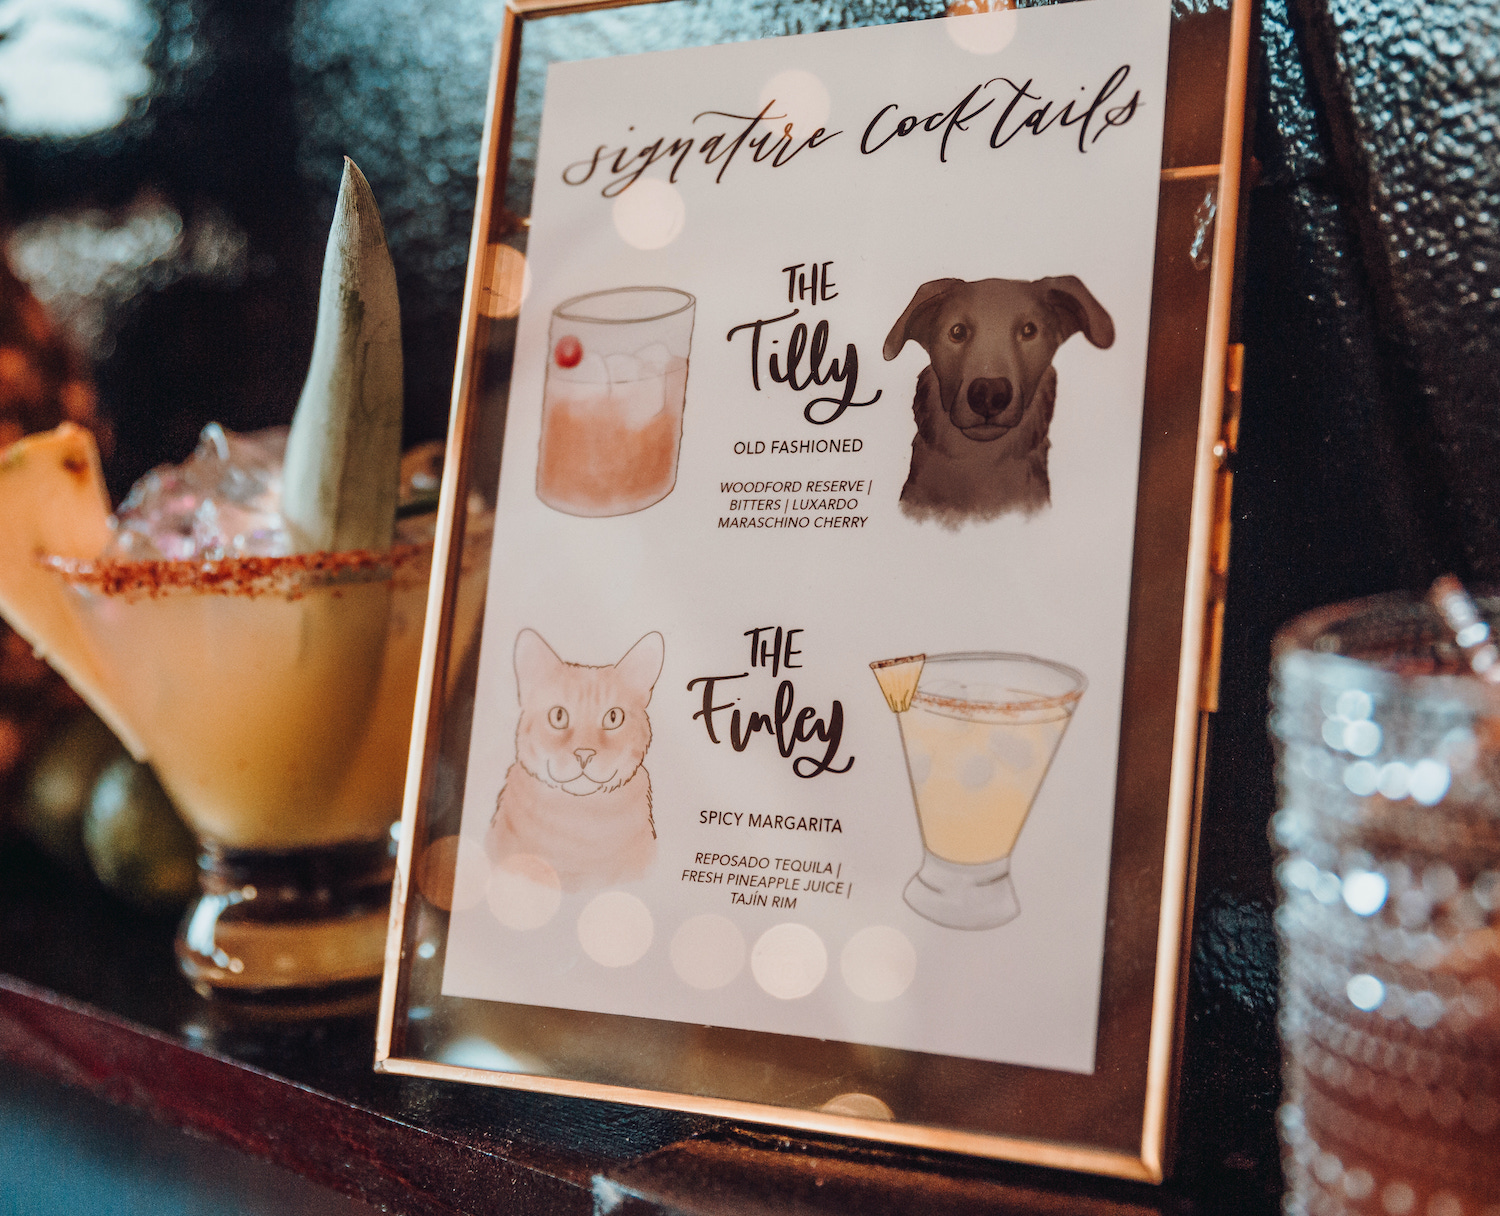 A cocktail menu that has drinks inspired by the couple’s dog and cat.